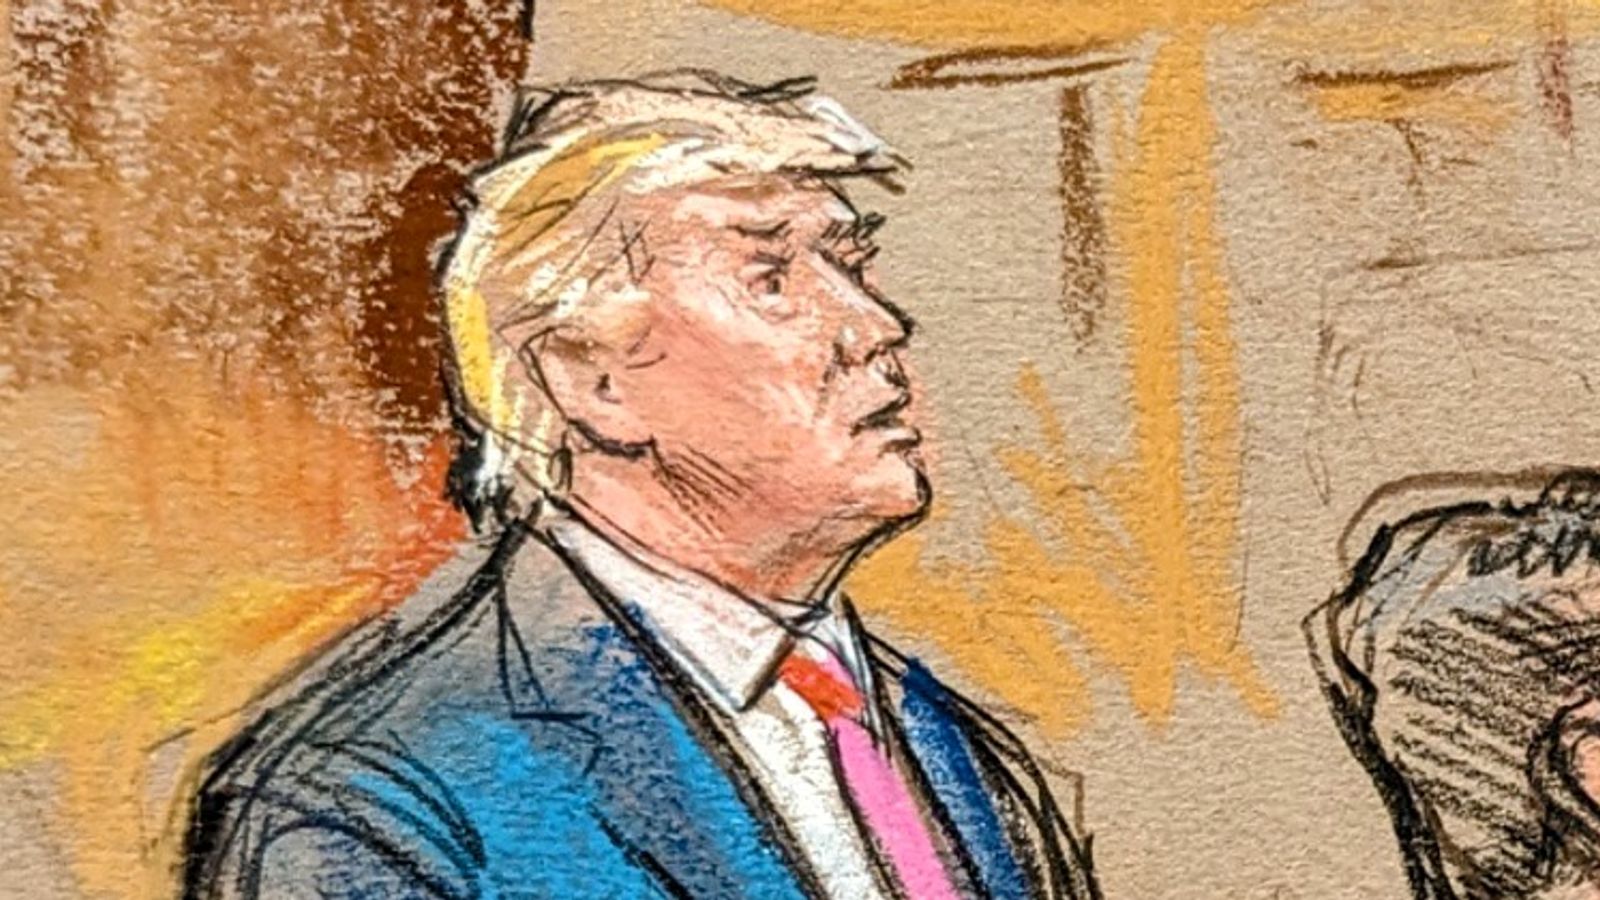 Donald Trump pleads not guilty to charges over January 6 riot and bid